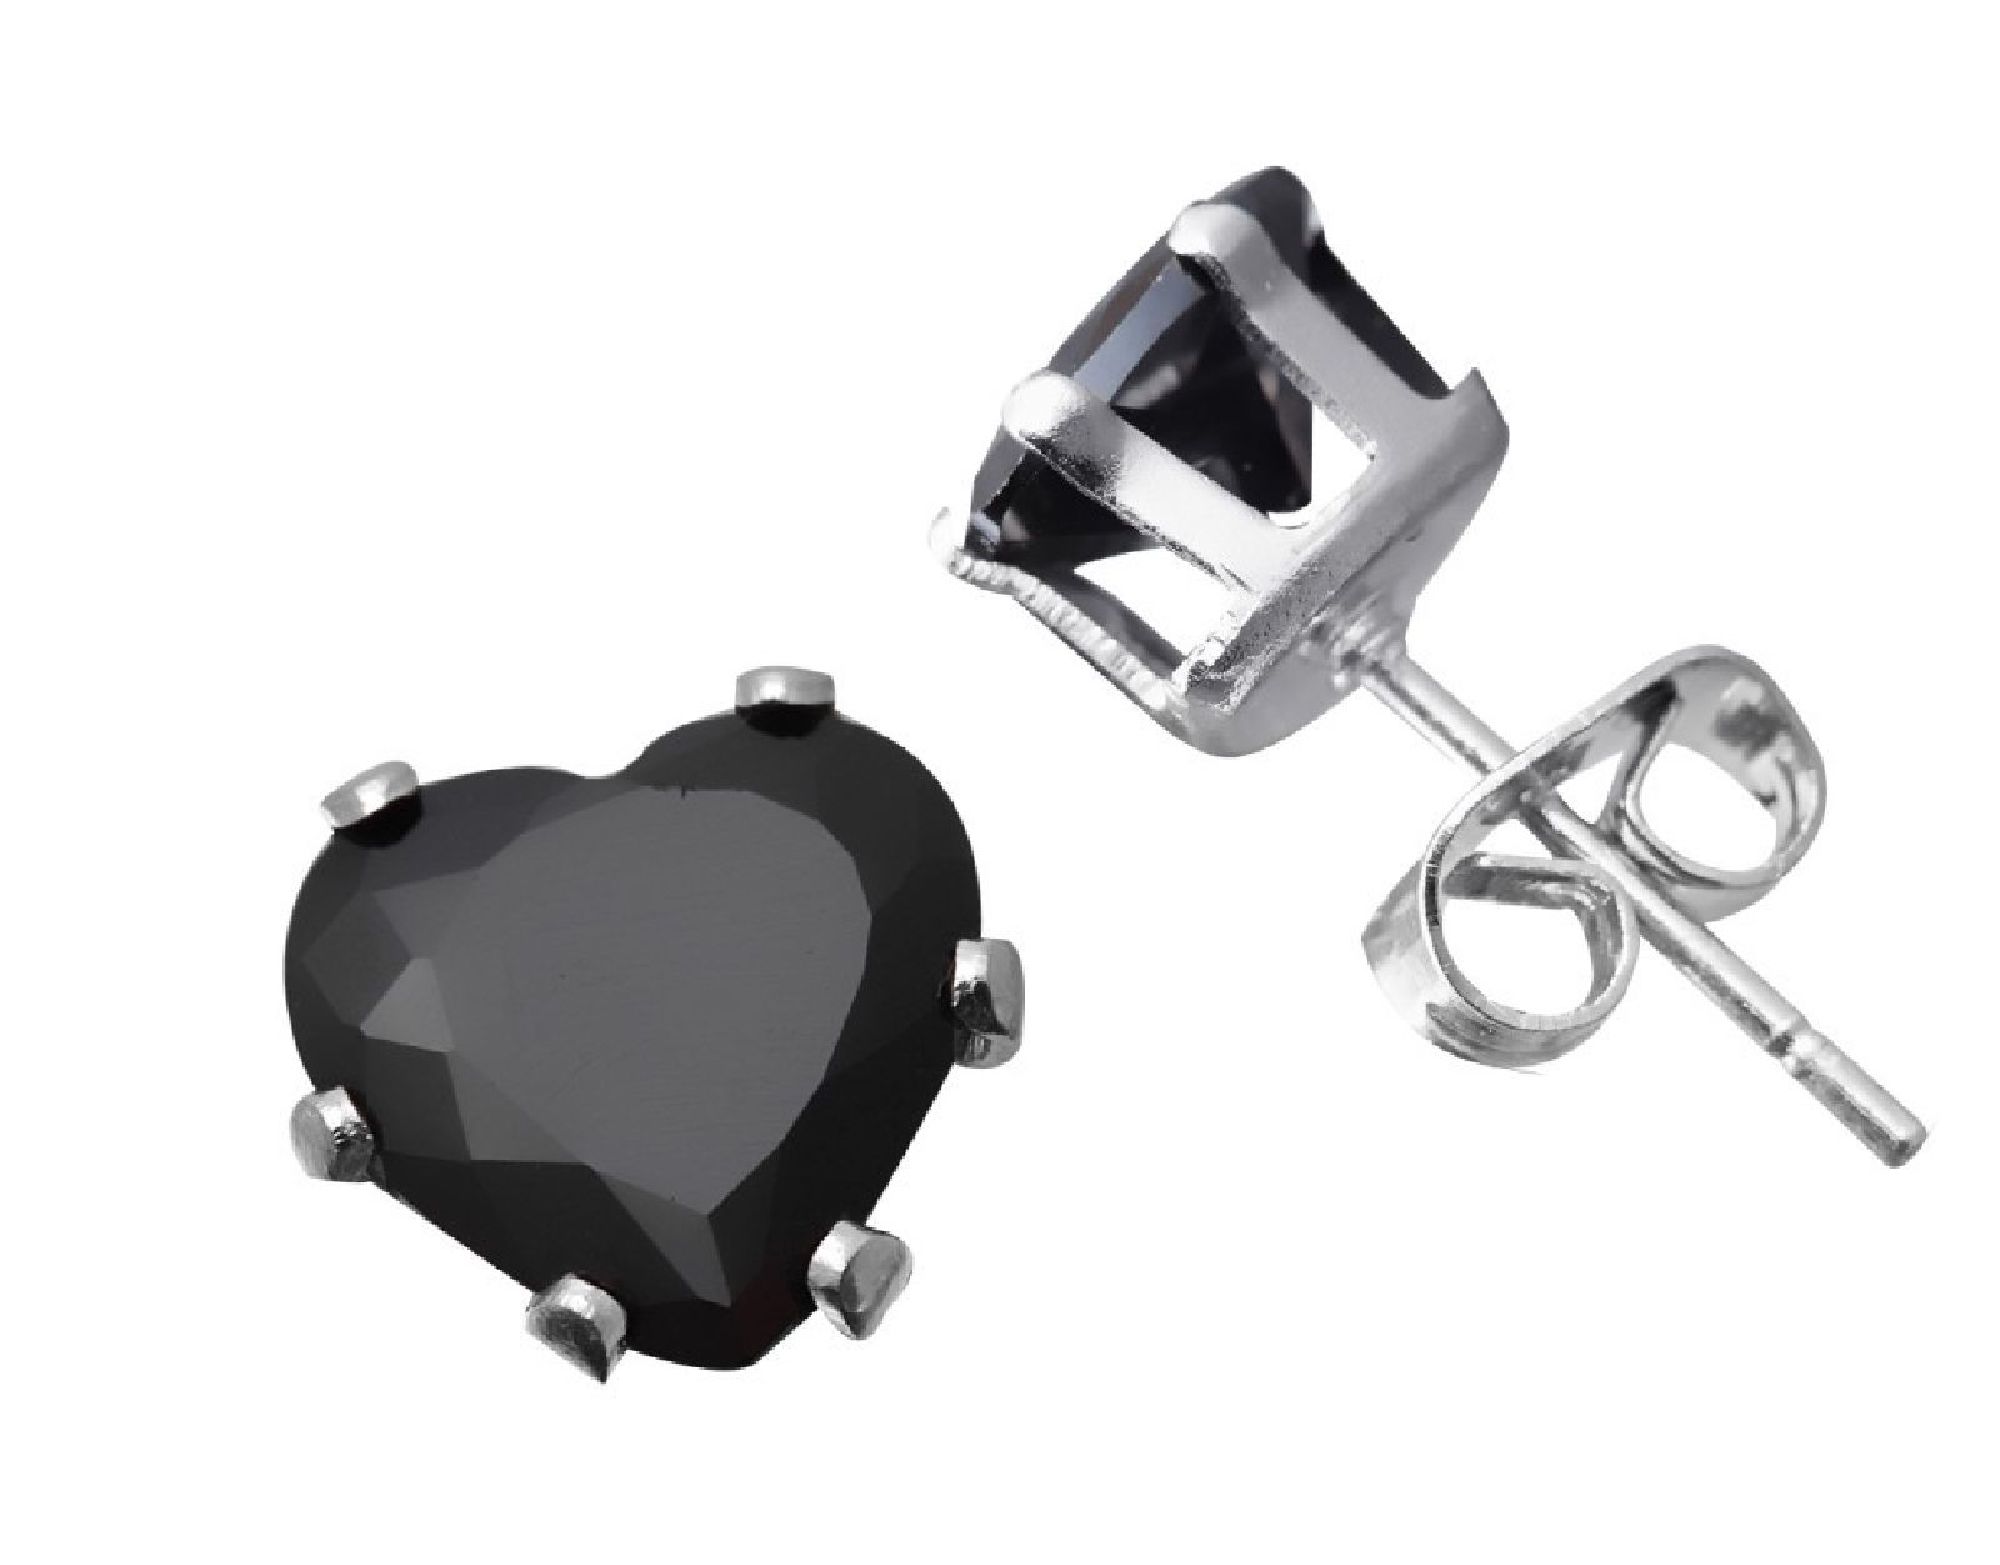 ParisJewelry.com 6 Carat Heart Shape Black Diamond manmade Stud Earrings for Woman in Platinum over Sterling Silver Designed in France